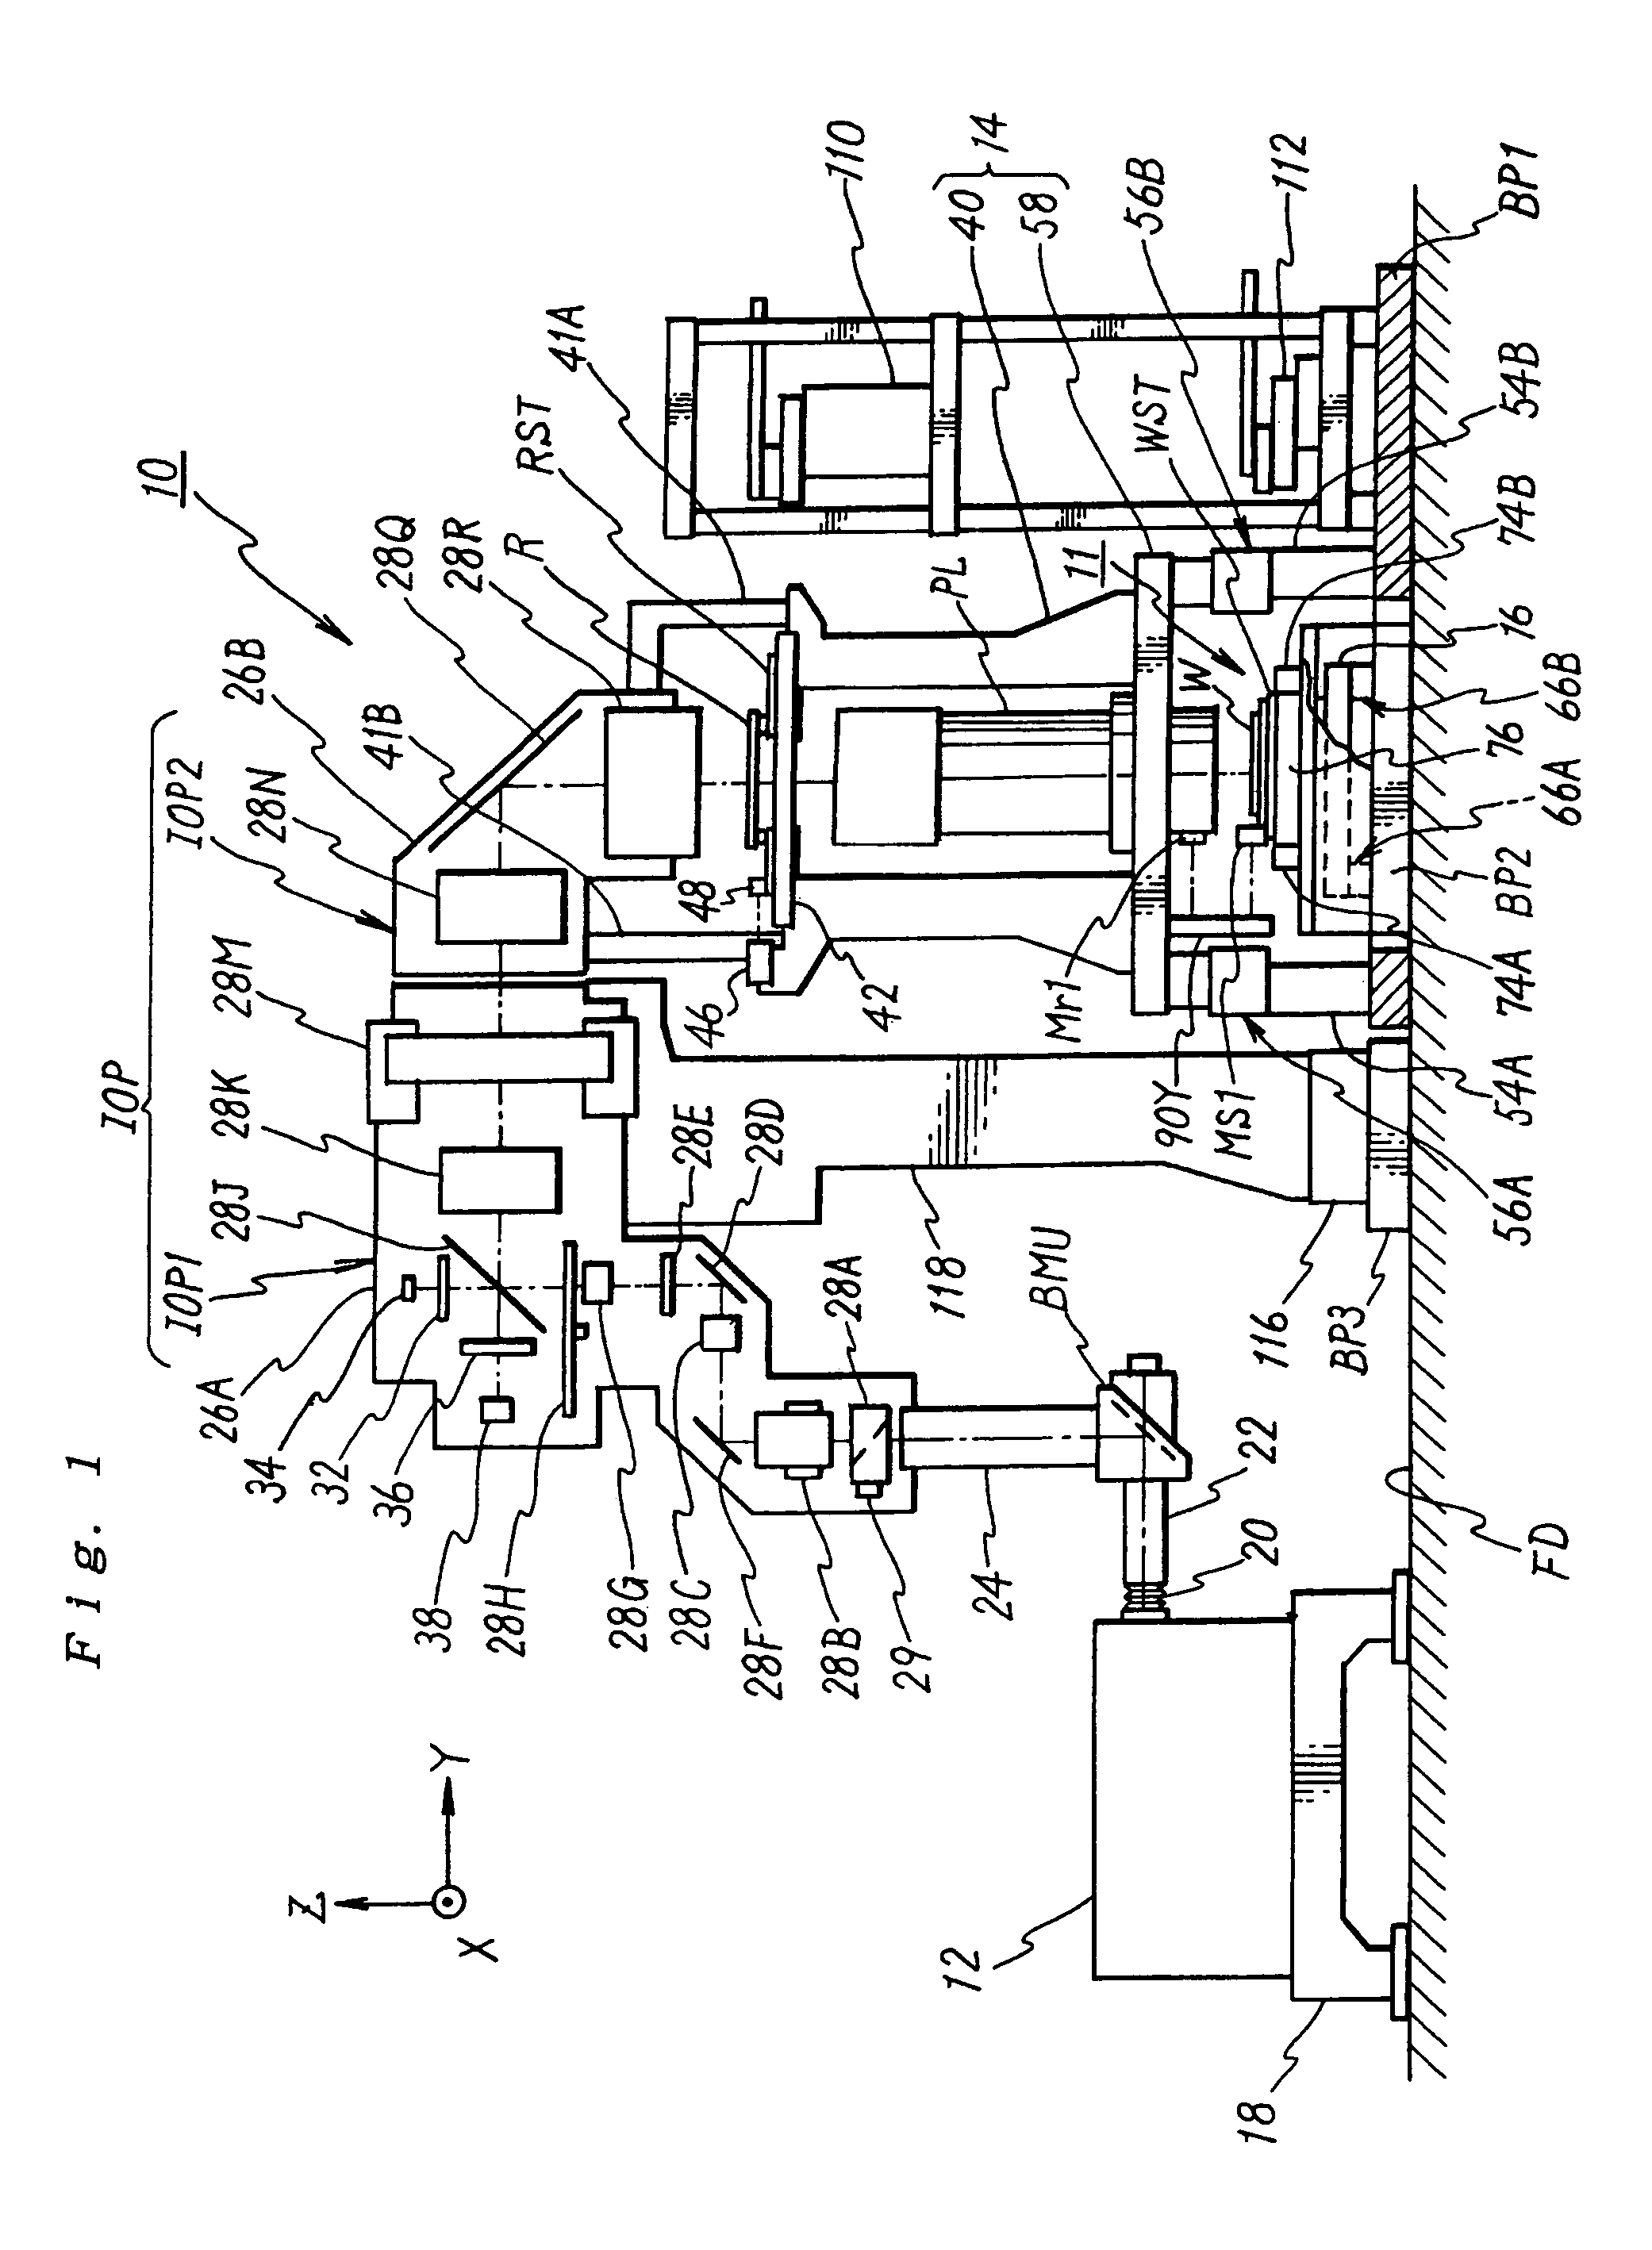 Stage device, exposure system, method of device manufacture, and device